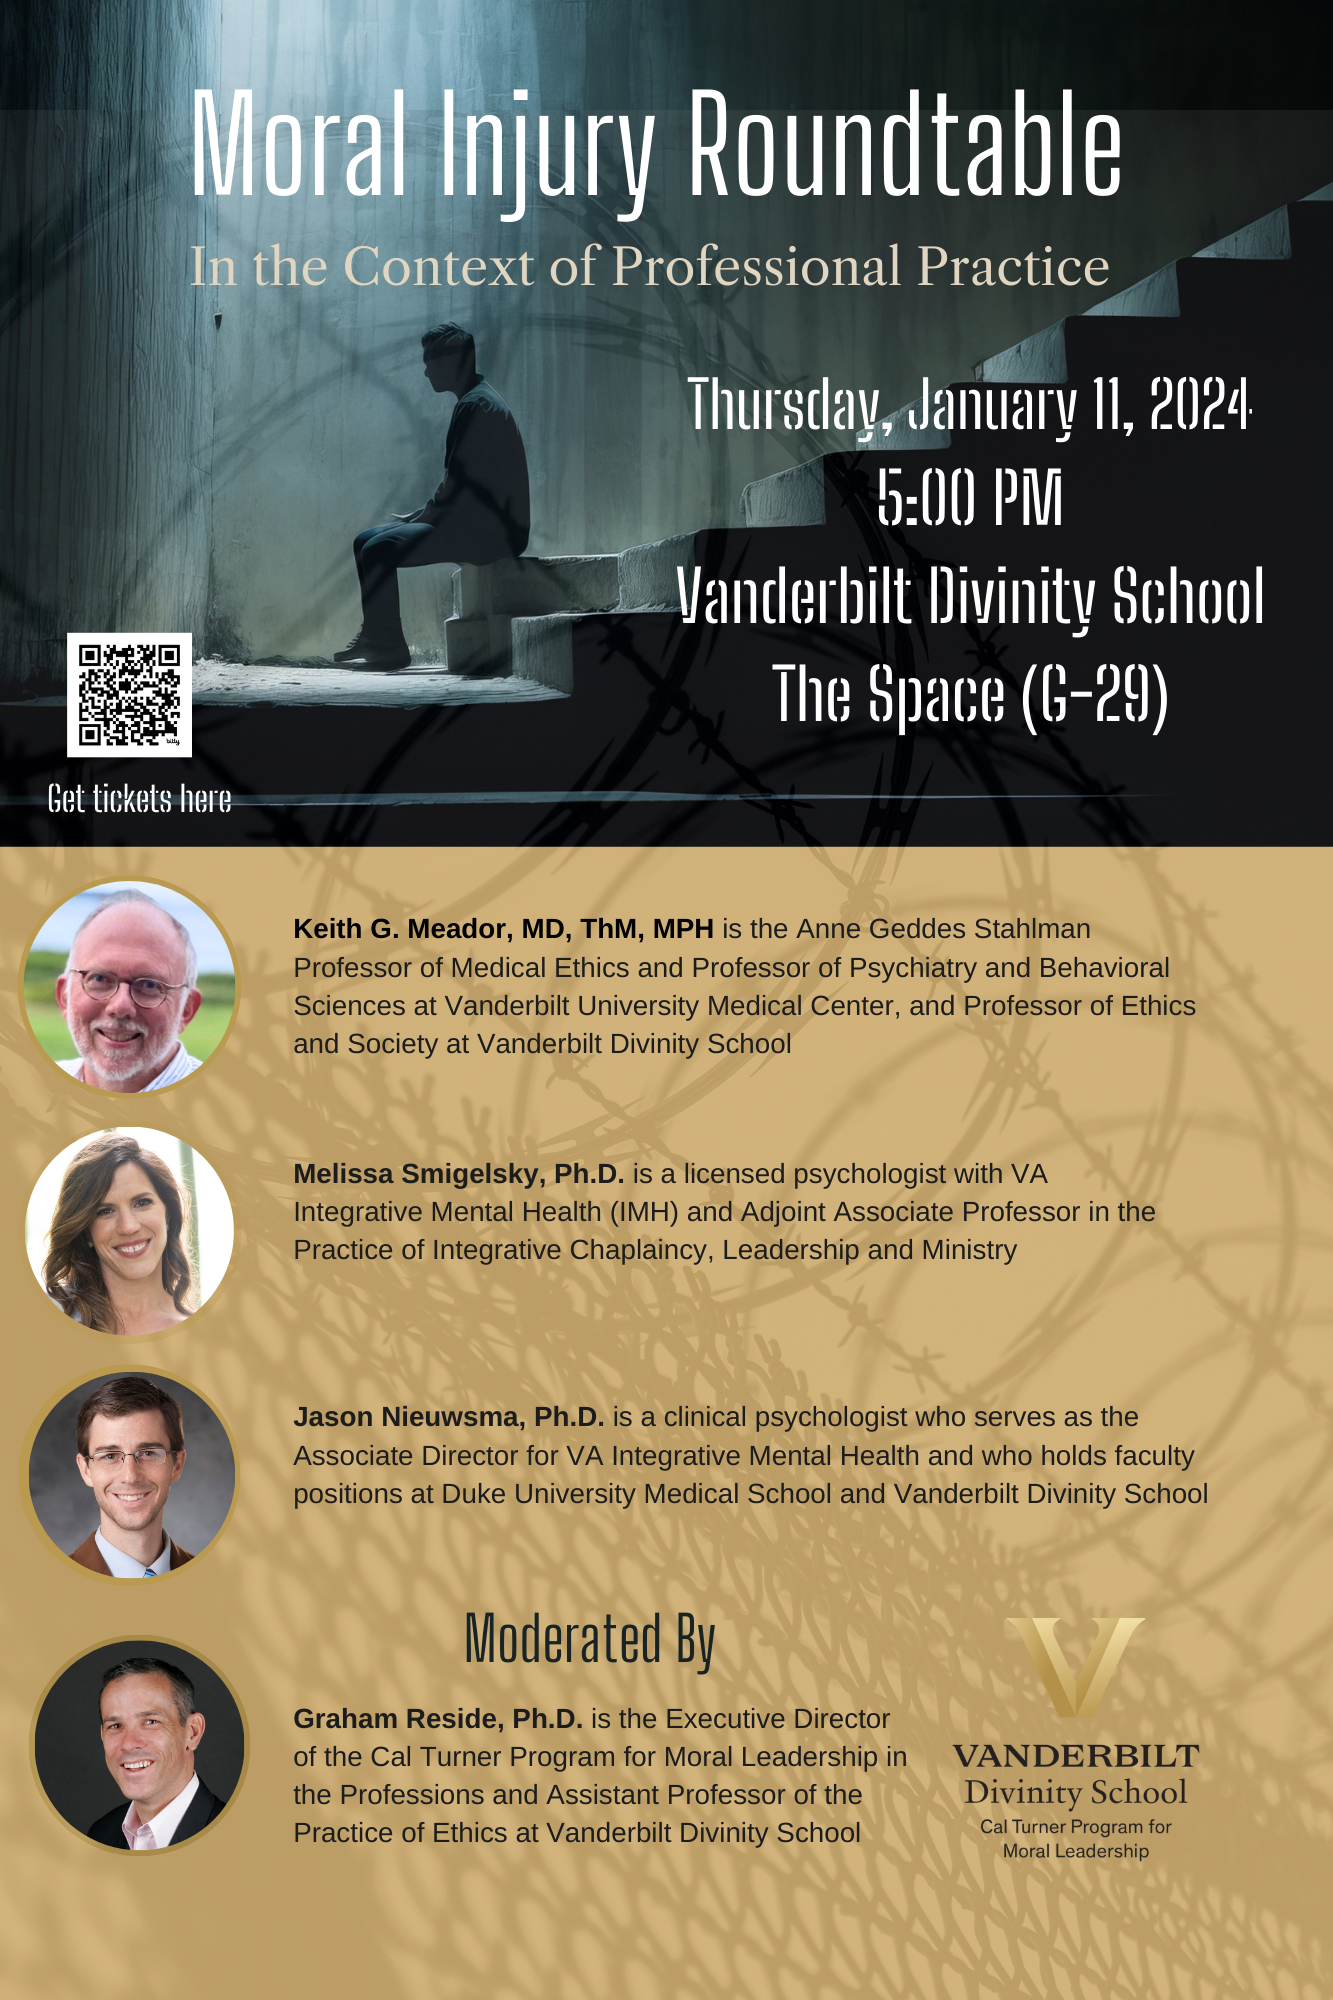 This is a poster for an event the text reads: Moral Injury Roundtable- In the Context of Professional Practice Thursday, January 11th 2024, 5:00 PM Vanderbilt Divinity School The Space (G-29) There are pictures of the speakers: Keith G. Meador, MD, ThM, MPH is the Anne Geddes Stahlman Professor of Medical Ethics and Professor of Psychiatry and Behavioral Sciences at Vanderbilt University Medical Center, and Professor of Ethics and Society at Vanderbilt Divinity School ,Melissa Smigelsky, Ph.D. is a licensed psychologist with VA Integrative Mental Health (IMH) and Adjoint Associate Professor in the Practice of Integrative Chaplaincy, Leadership and Ministry, ason Nieuwsma, Ph.D. is a clinical psychologist who serves as the Associate Director for VA Integrative Mental Health and who holds faculty positions at Duke University Medical School and Vanderbilt Divinity School Moderated By: Graham Reside, Ph.D. is the Executive Director of the Cal Turner Program for Moral Leadership in the Professions and Assistant Professor of the Practice of Ethics at Vanderbilt Divinity School